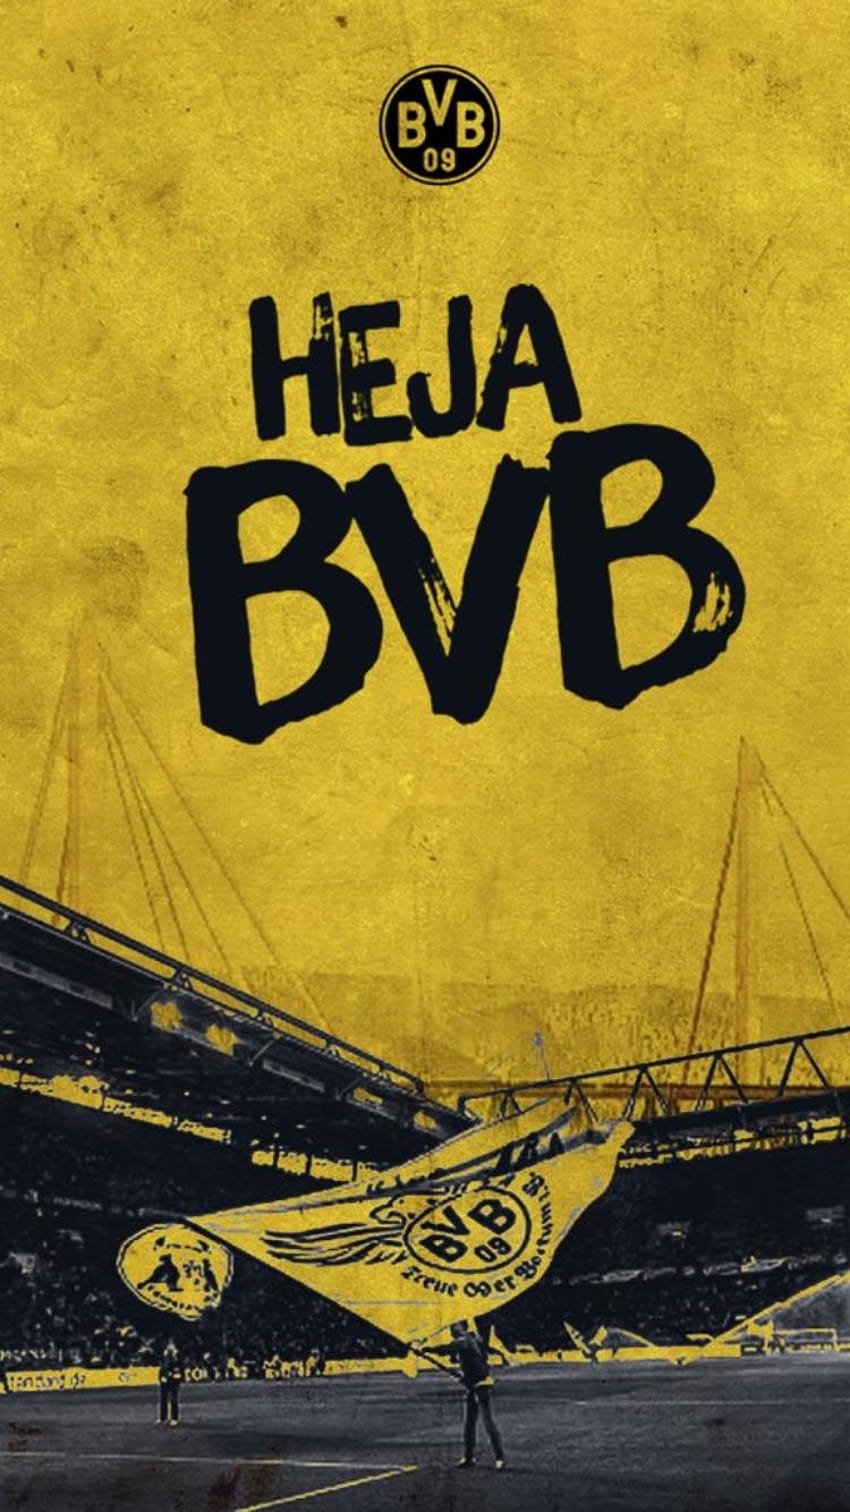 Here's a that the official BVB Twitter posted. Hope you like it! : r/borussiadortmund, bvb 09 HD phone wallpaper